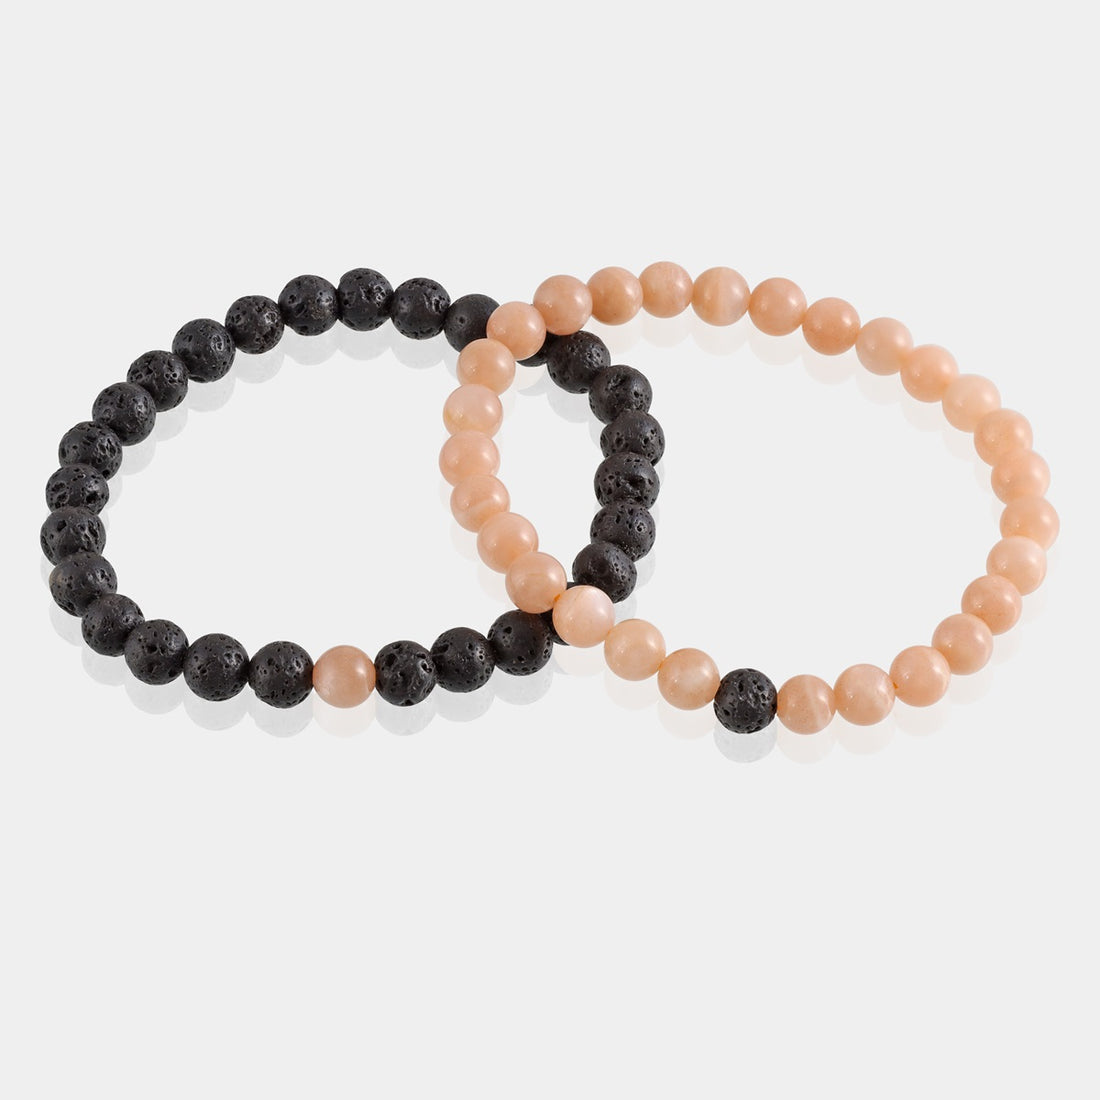 Stylish Peach Moonstone and Lava Bracelet featuring 6mm beads, a harmonious fusion of elegance, emotional healing, and grounding energy on the wrist